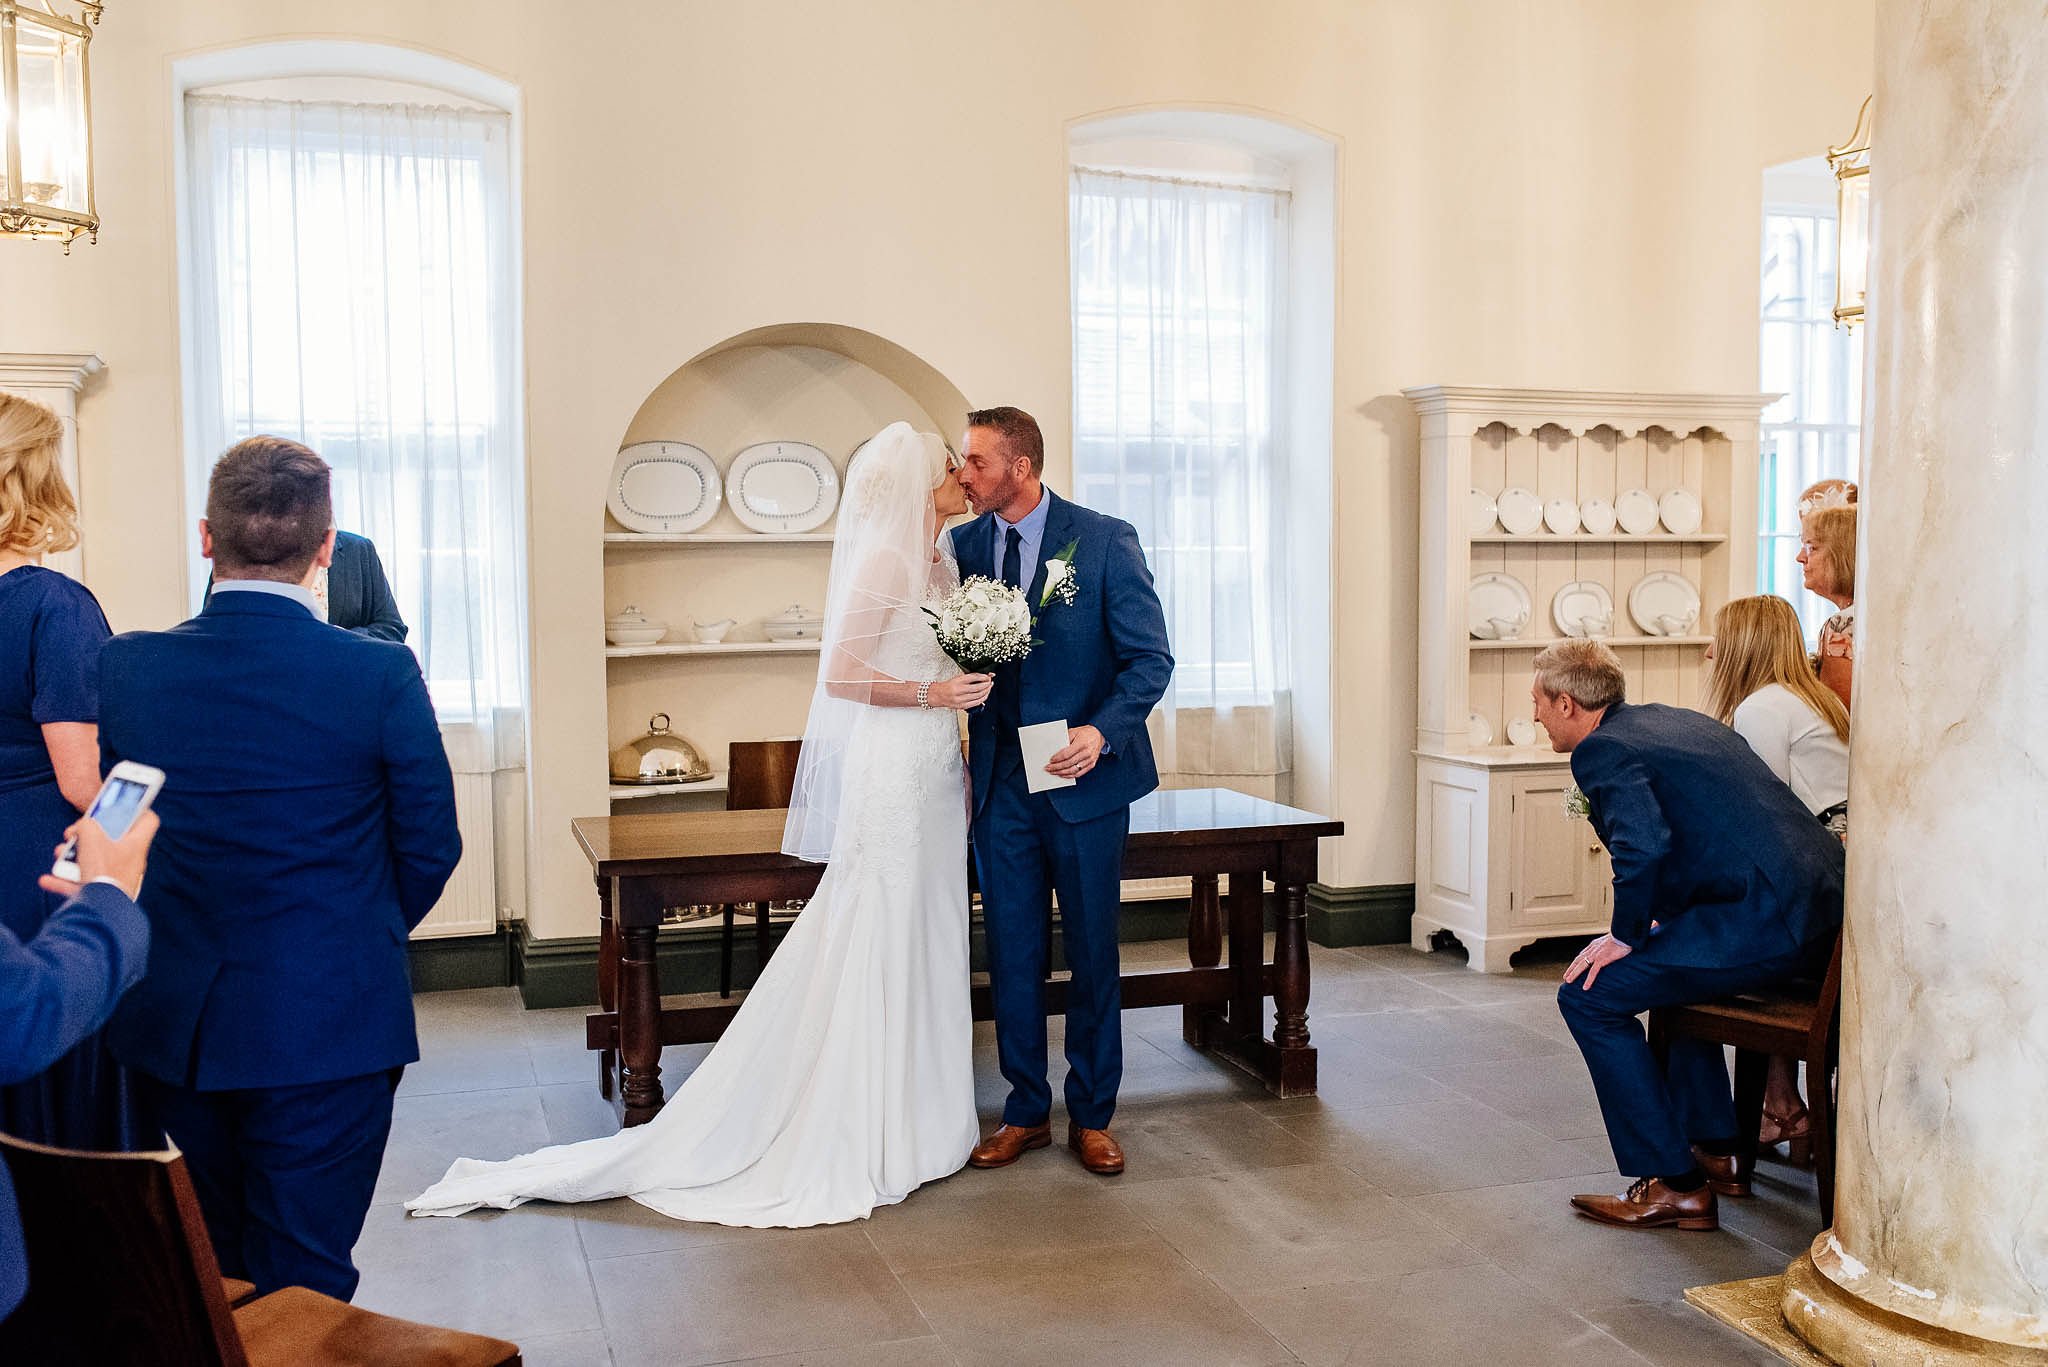 Doncaster Register Office wedding photography prices